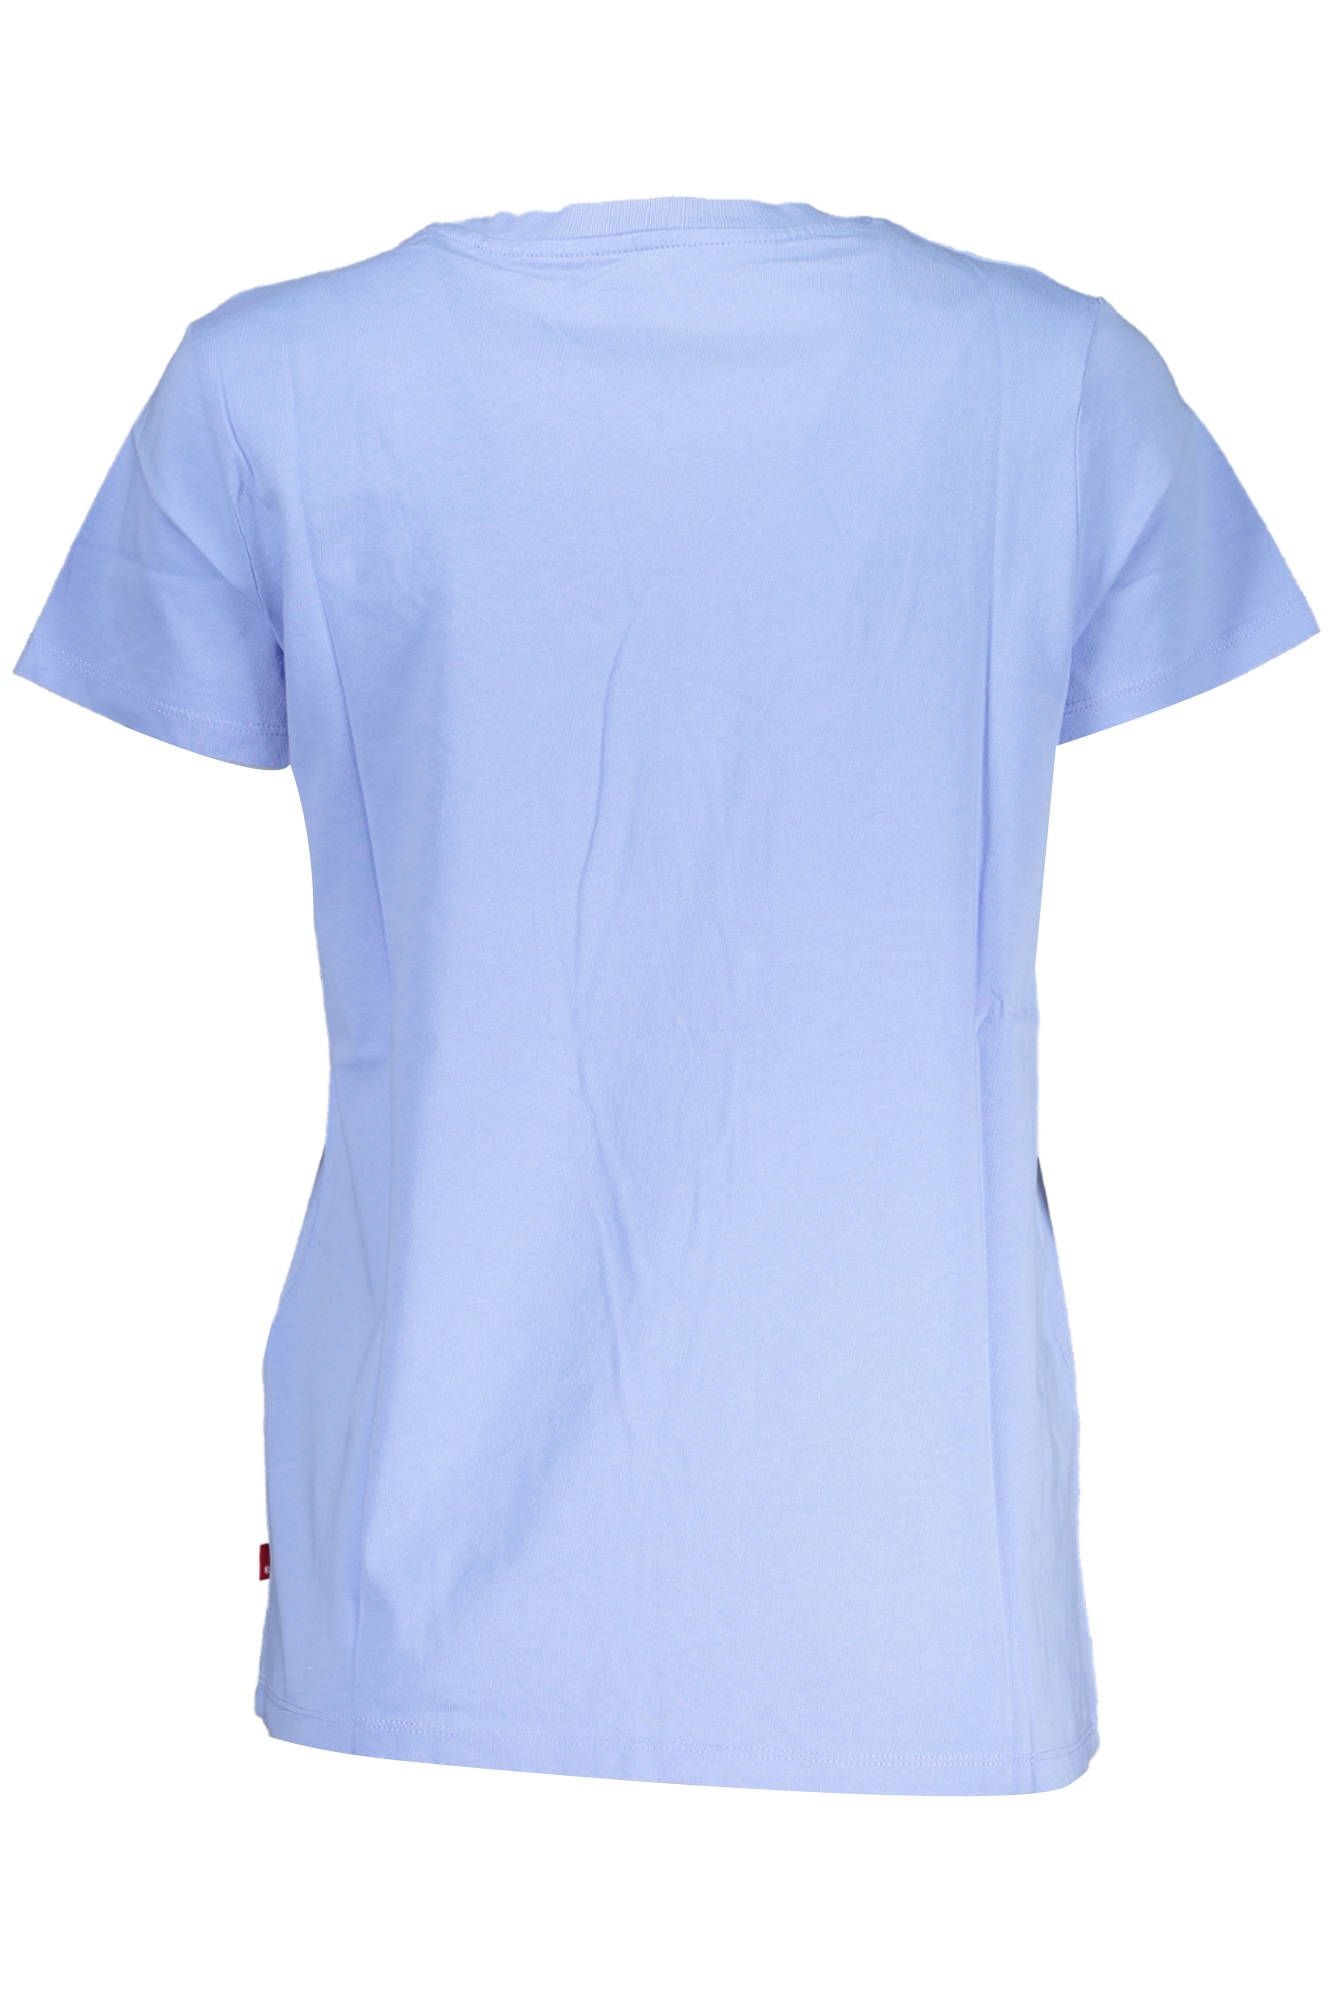 Levi's Light Blue Classic Cotton Tee with Print